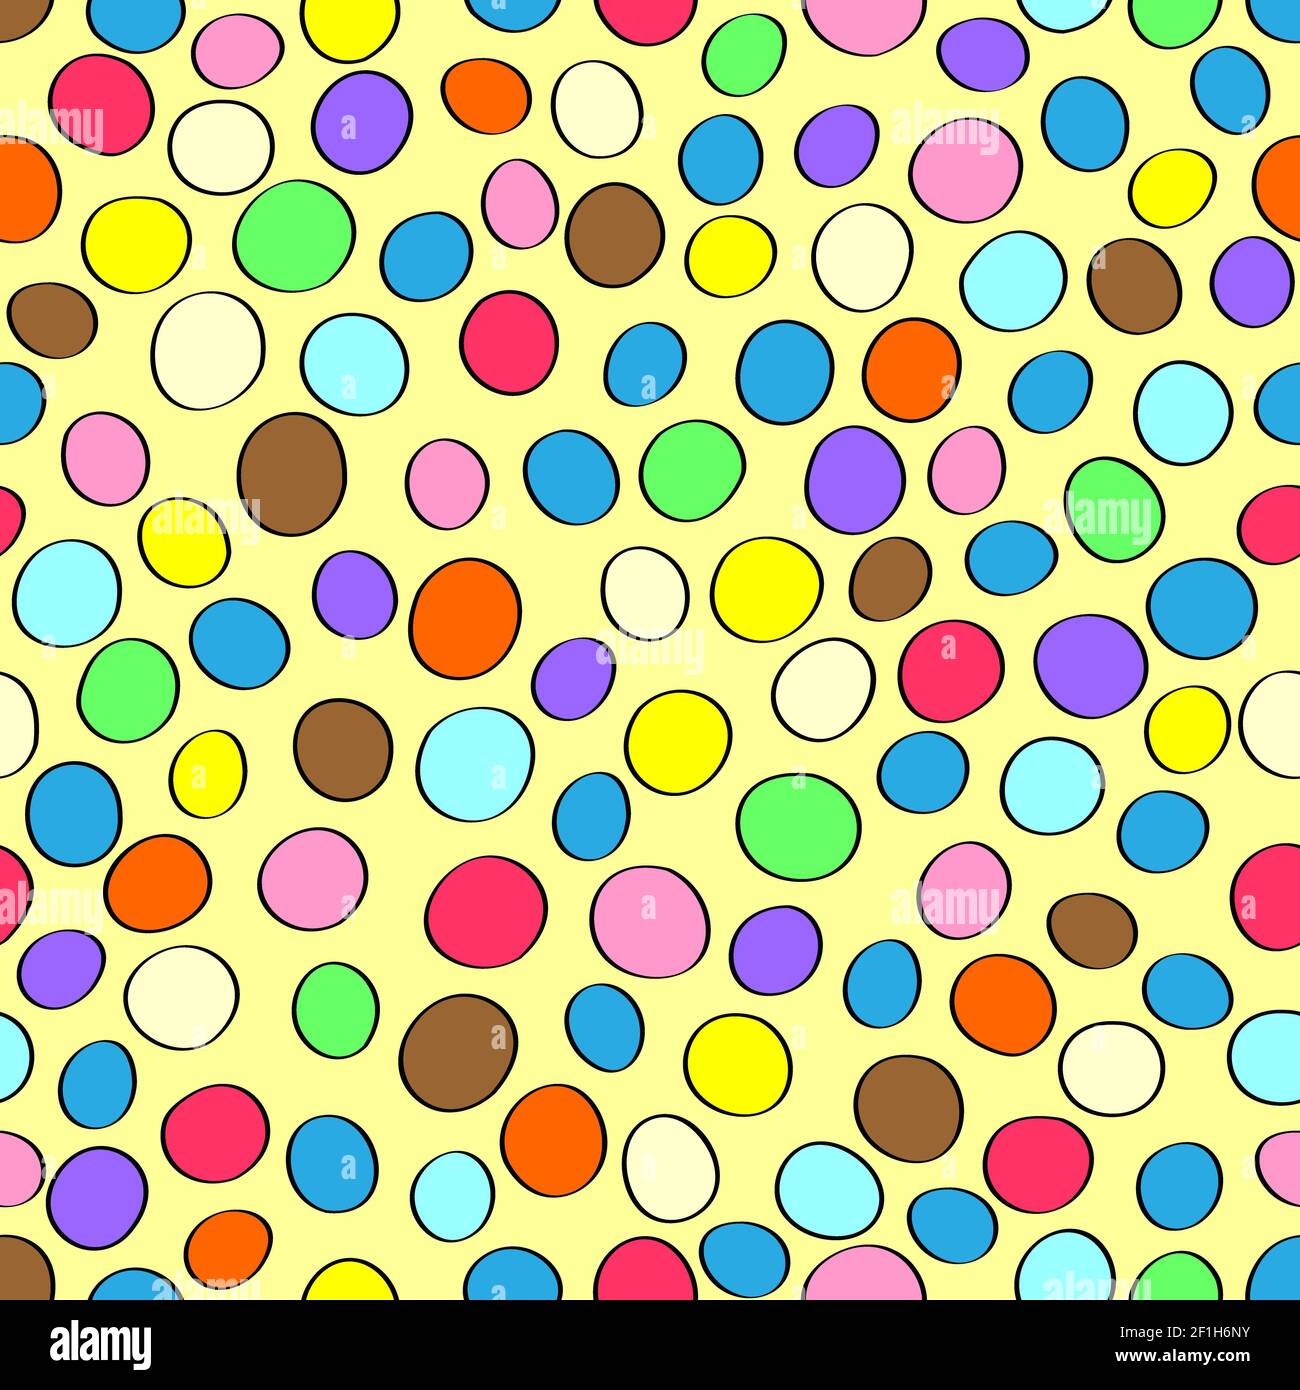 Seamless pattern of multicolored circles Stock Photo